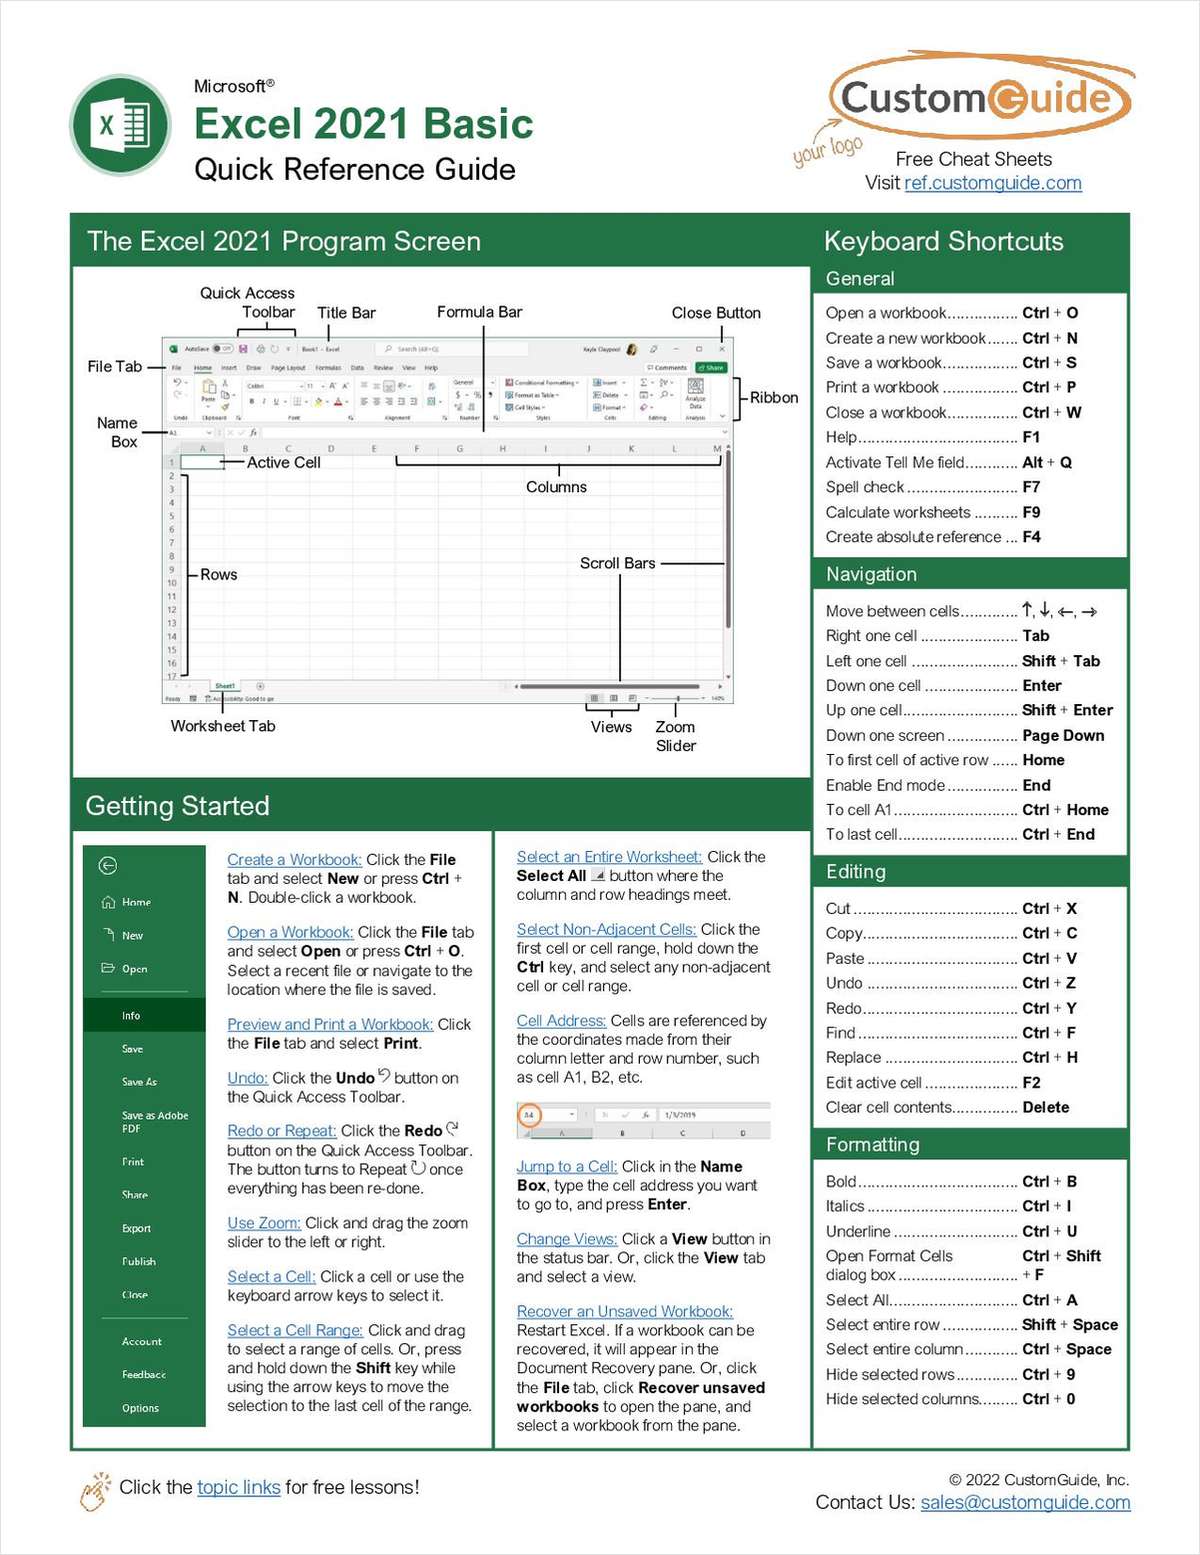 Microsoft Excel 2021 Basic -- Quick Reference Guide